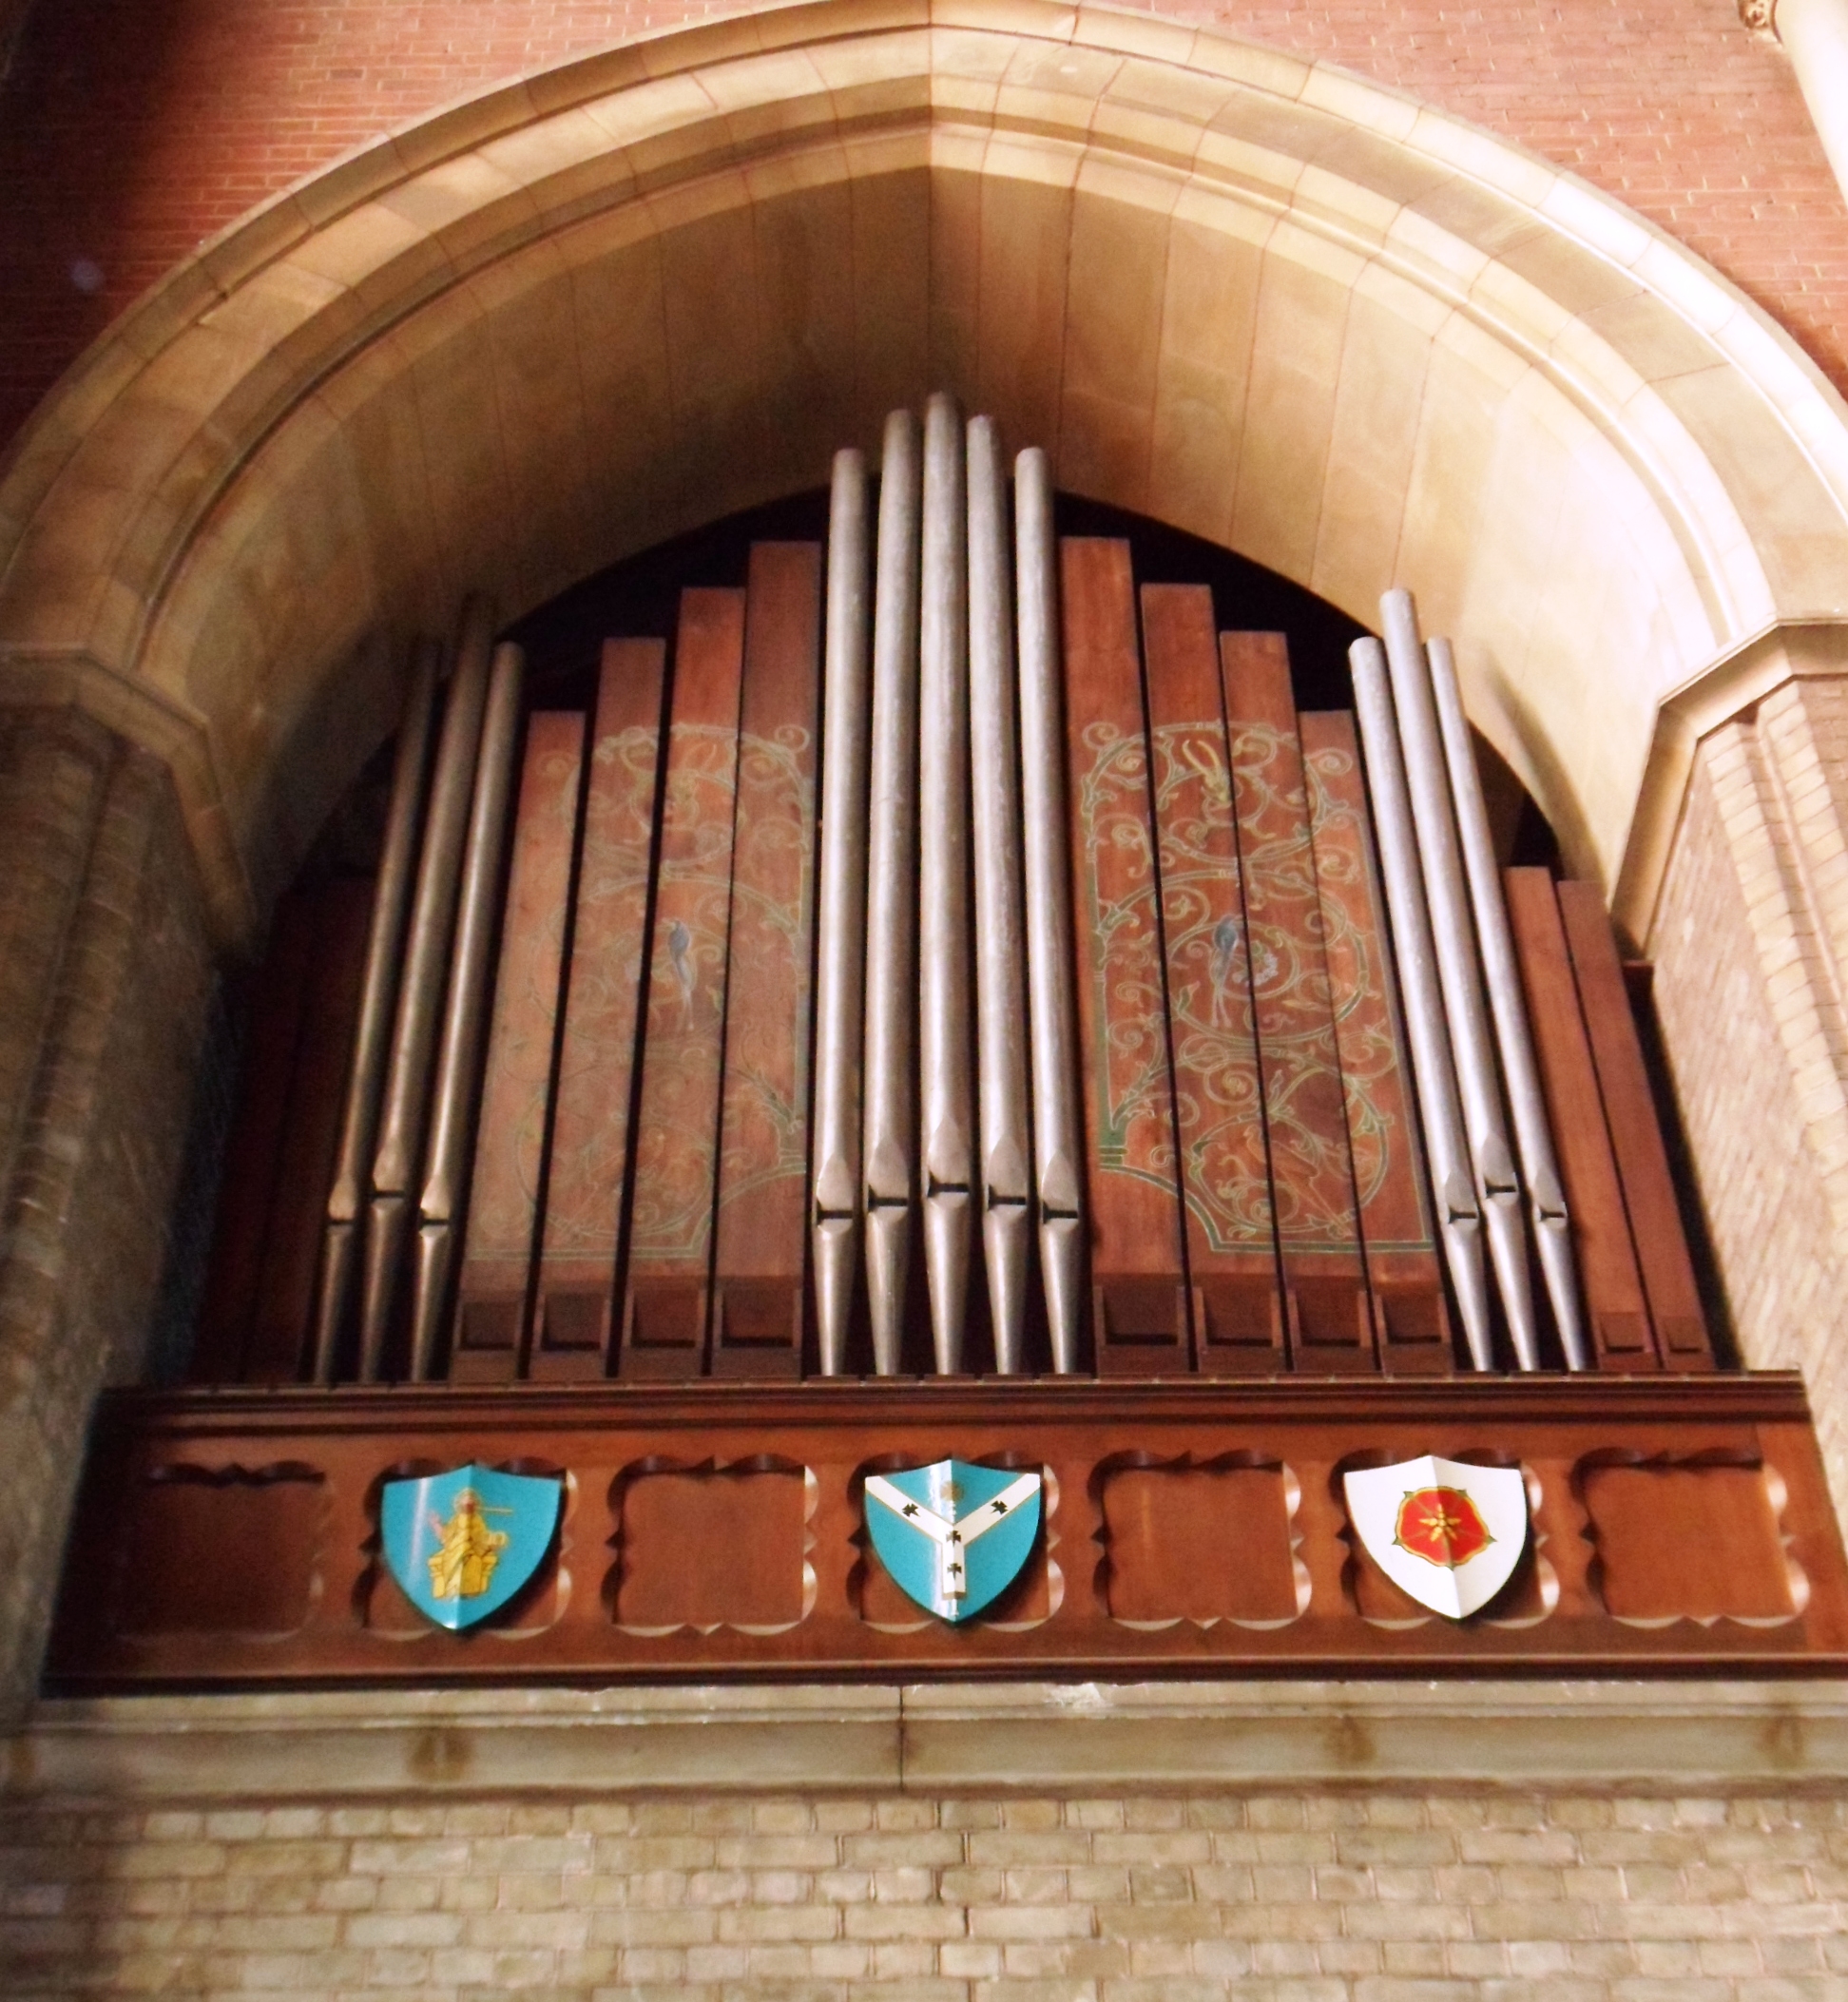 Organ picture